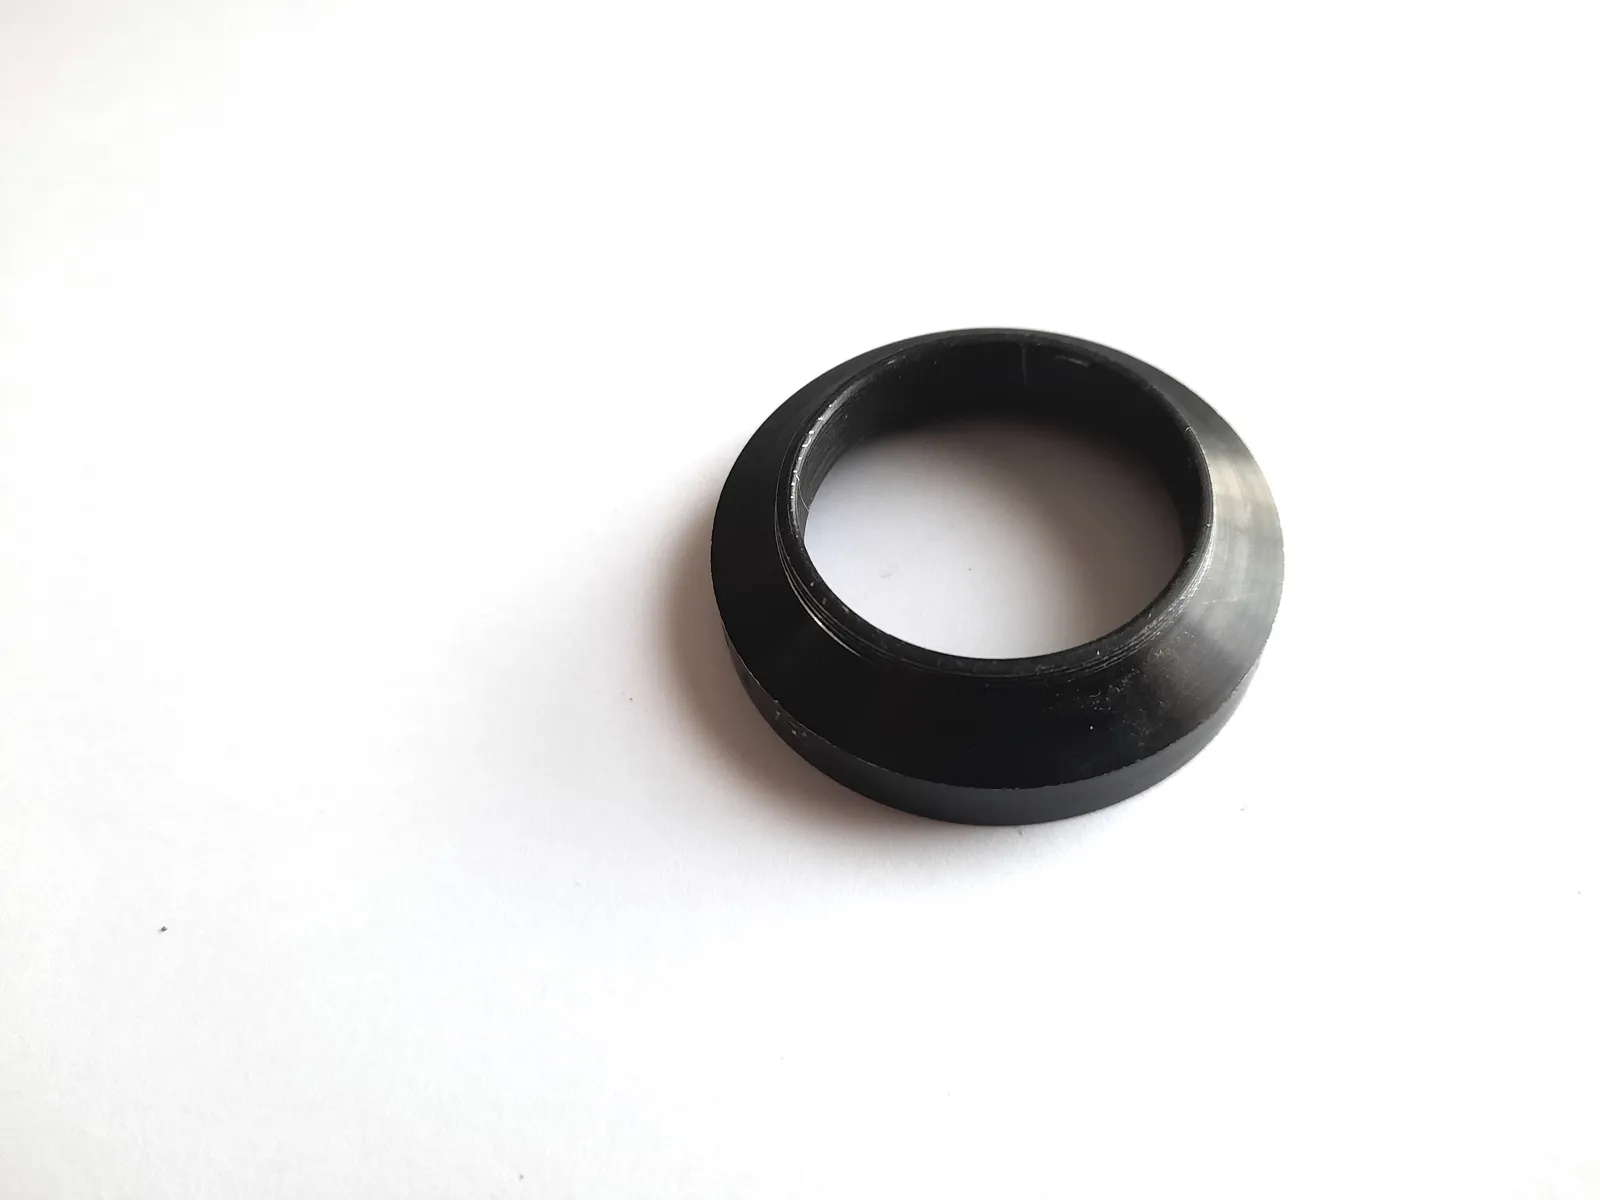 Tiffen 27mm F5 Adapter Ring - for Series 5 Thread Camera Lens - Clean